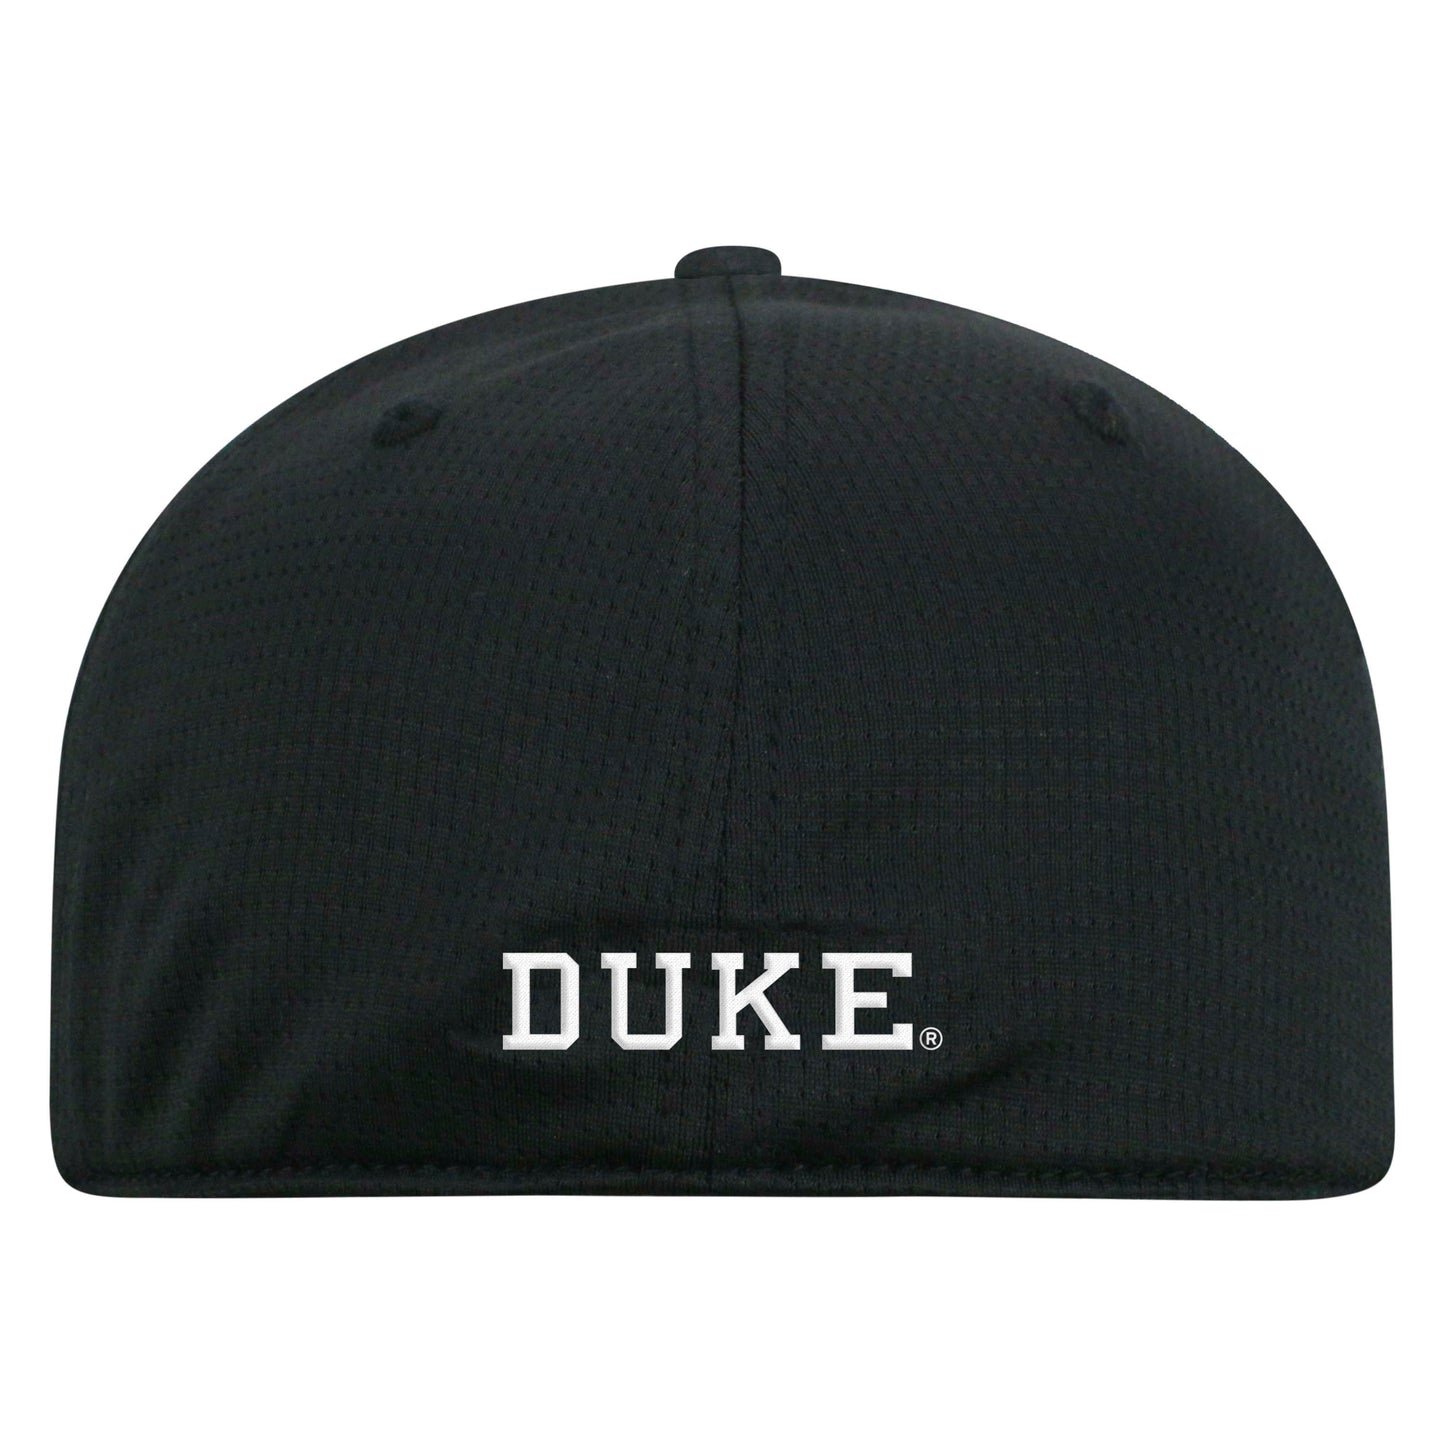 Mens Duke Blue Devils Fabooia One Fit Flex Fit Hat By Top Of The World